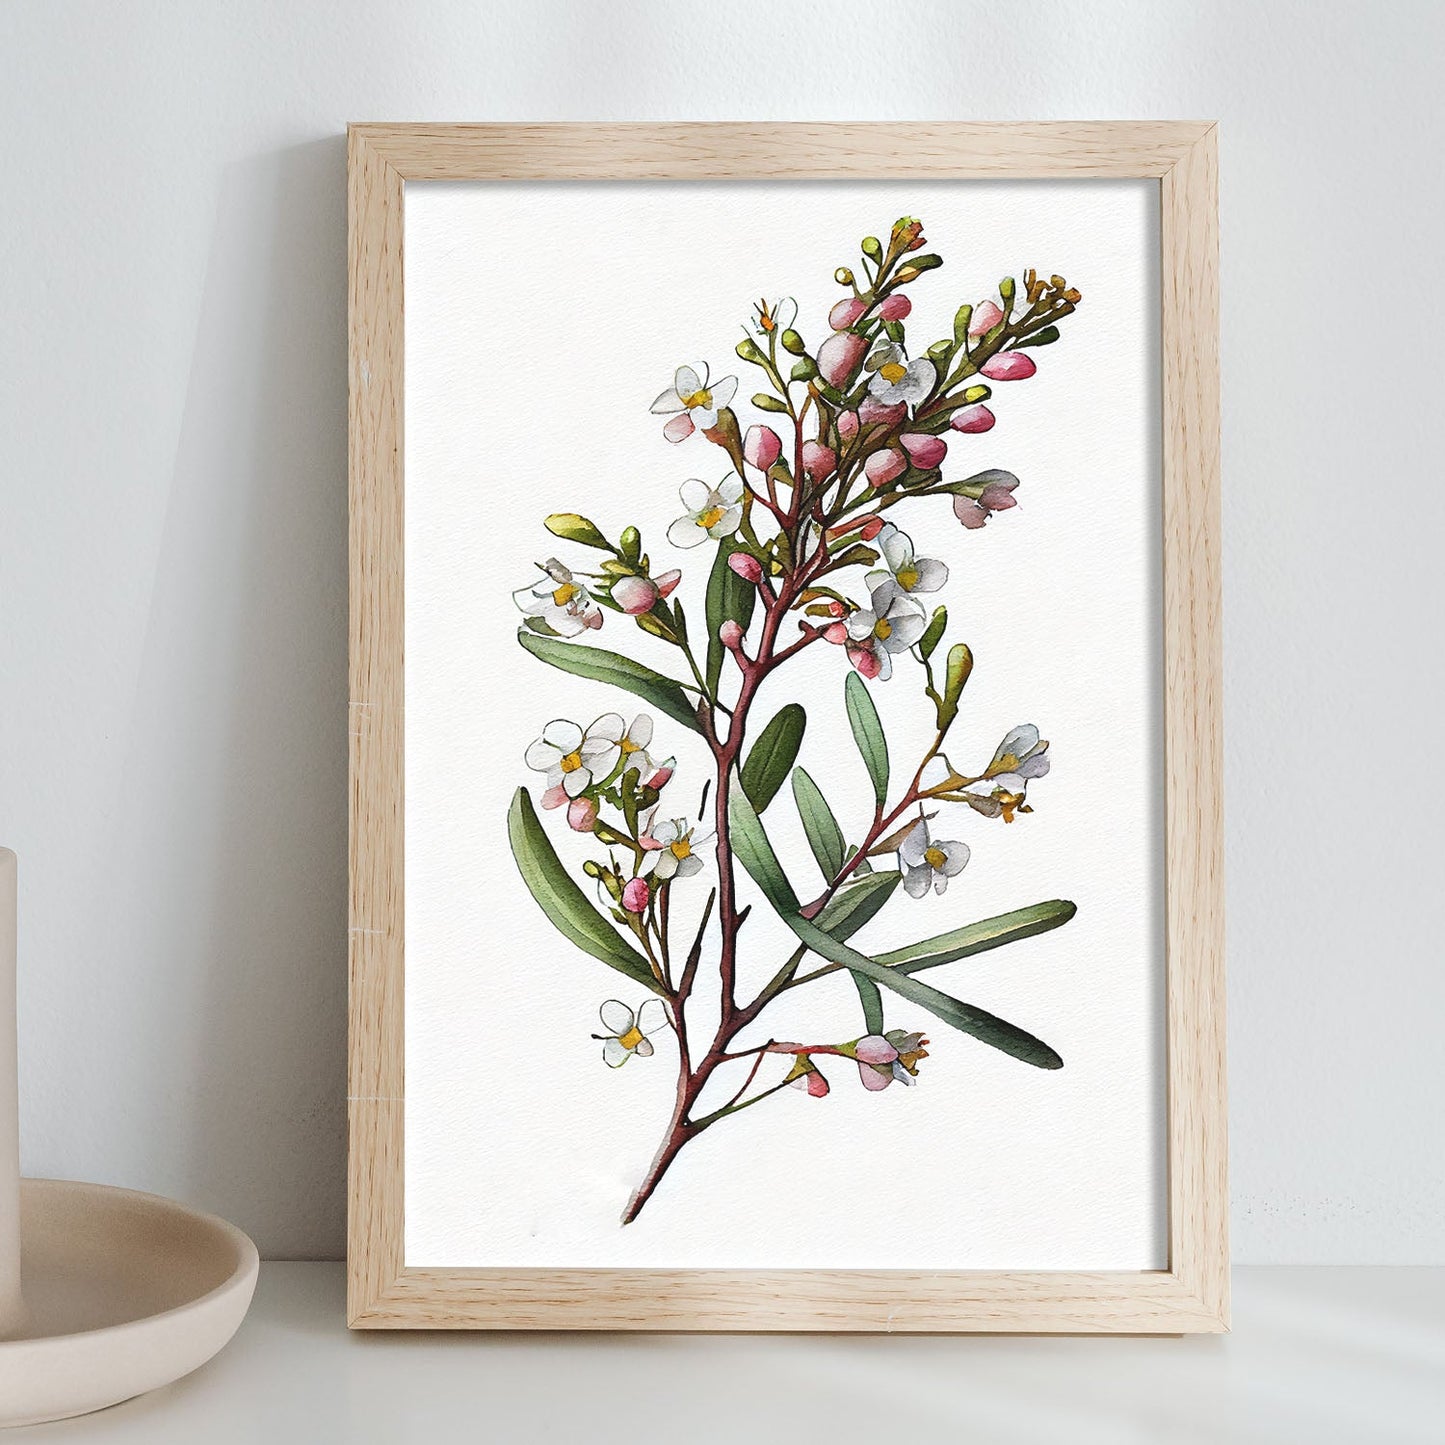 Nacnic watercolor minmal Waxflower_1. Aesthetic Wall Art Prints for Bedroom or Living Room Design.